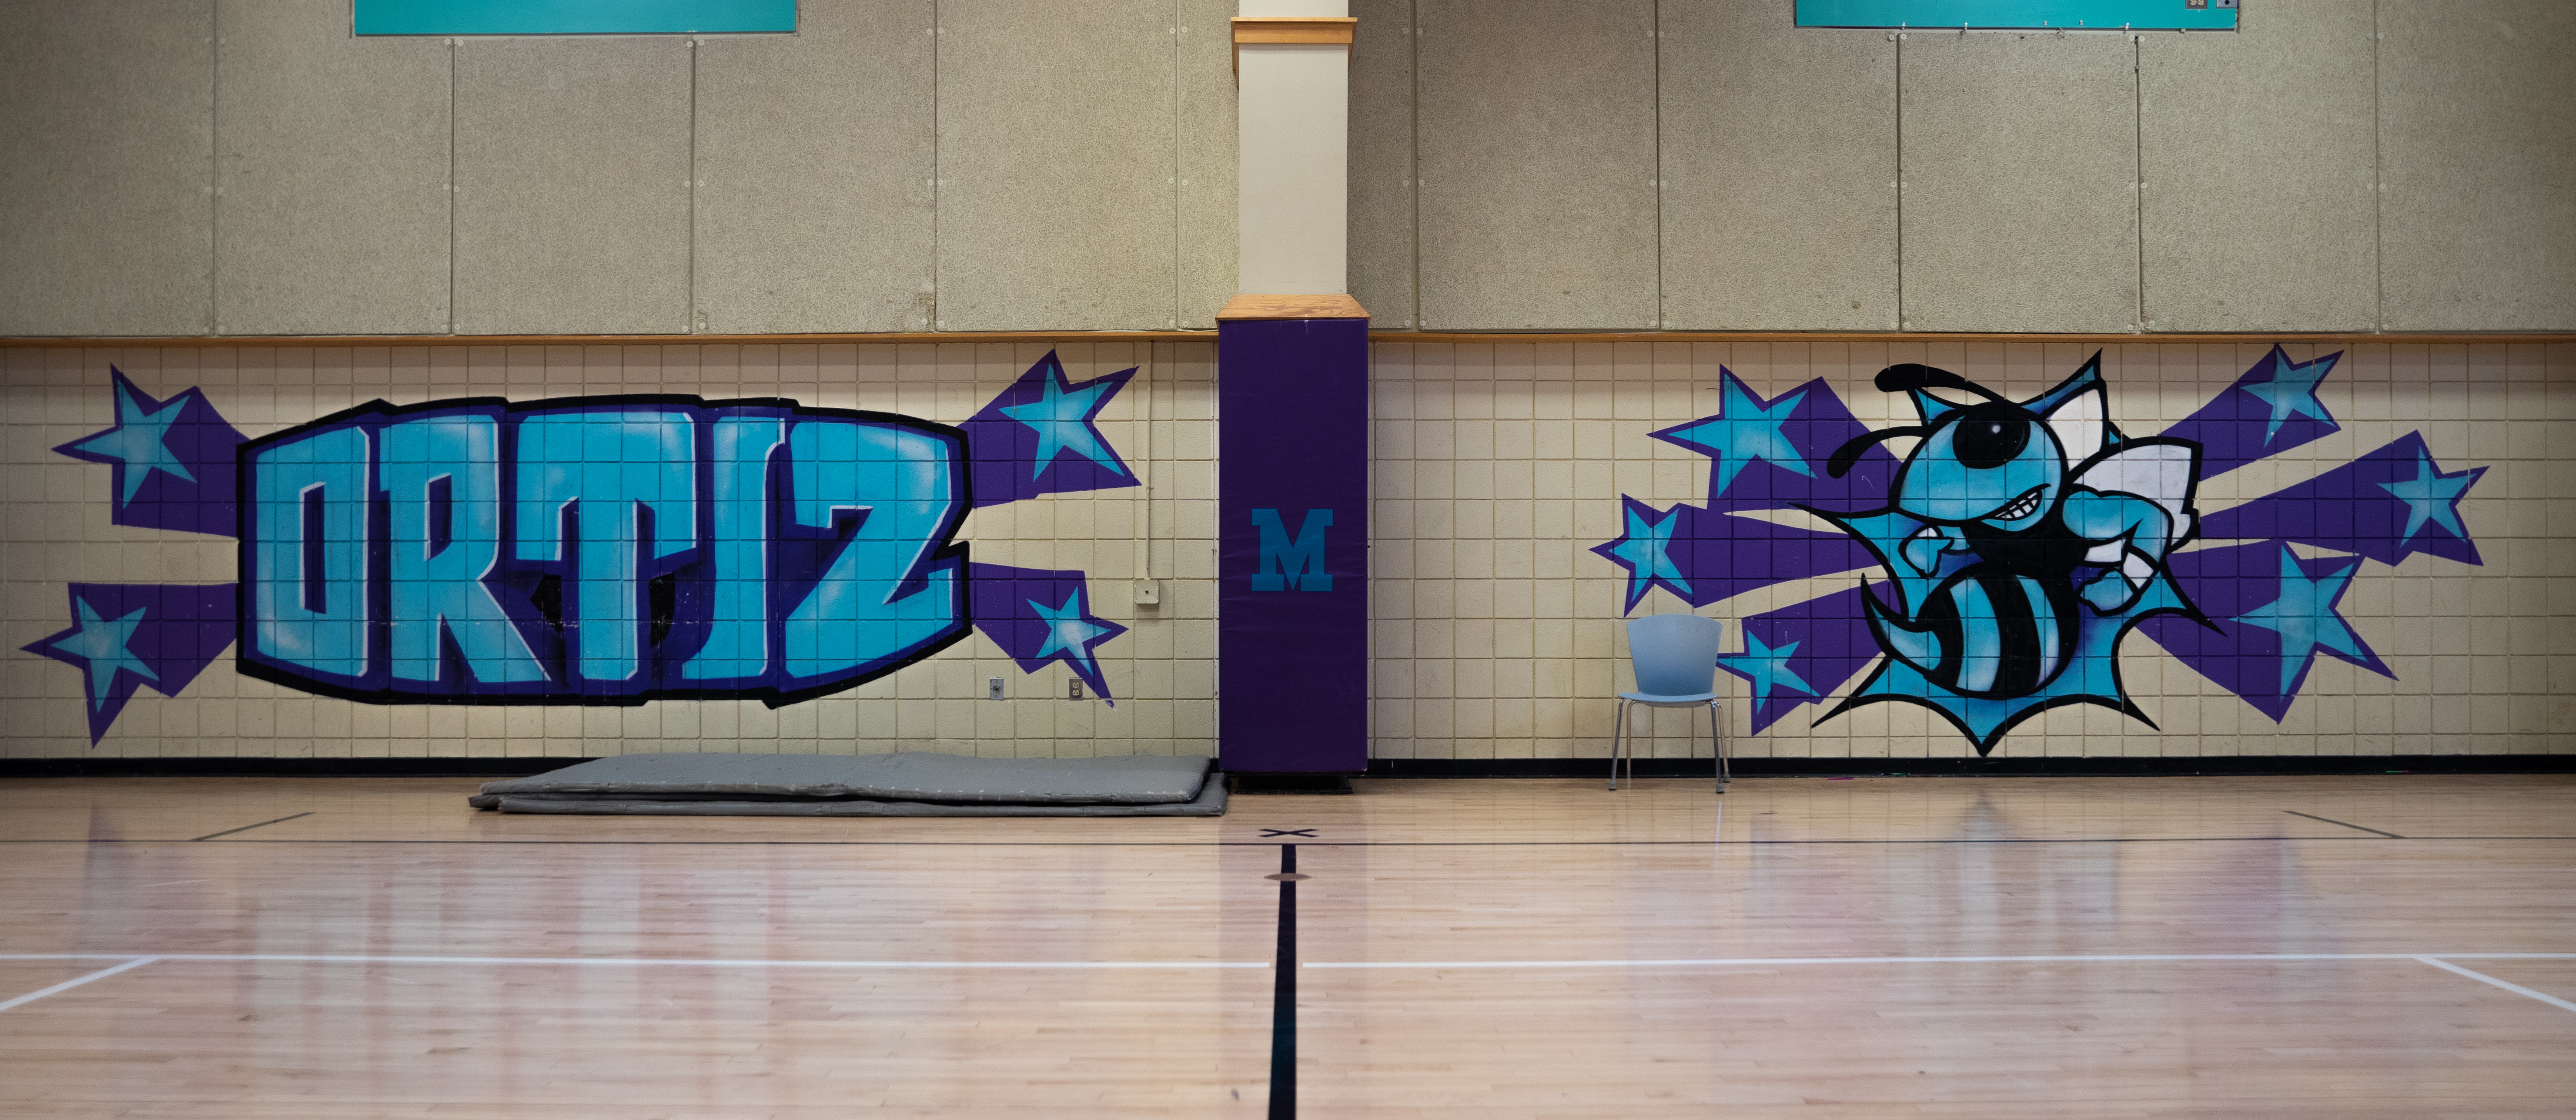 Gym Wall with blue and purple Ortiz and a Hornet